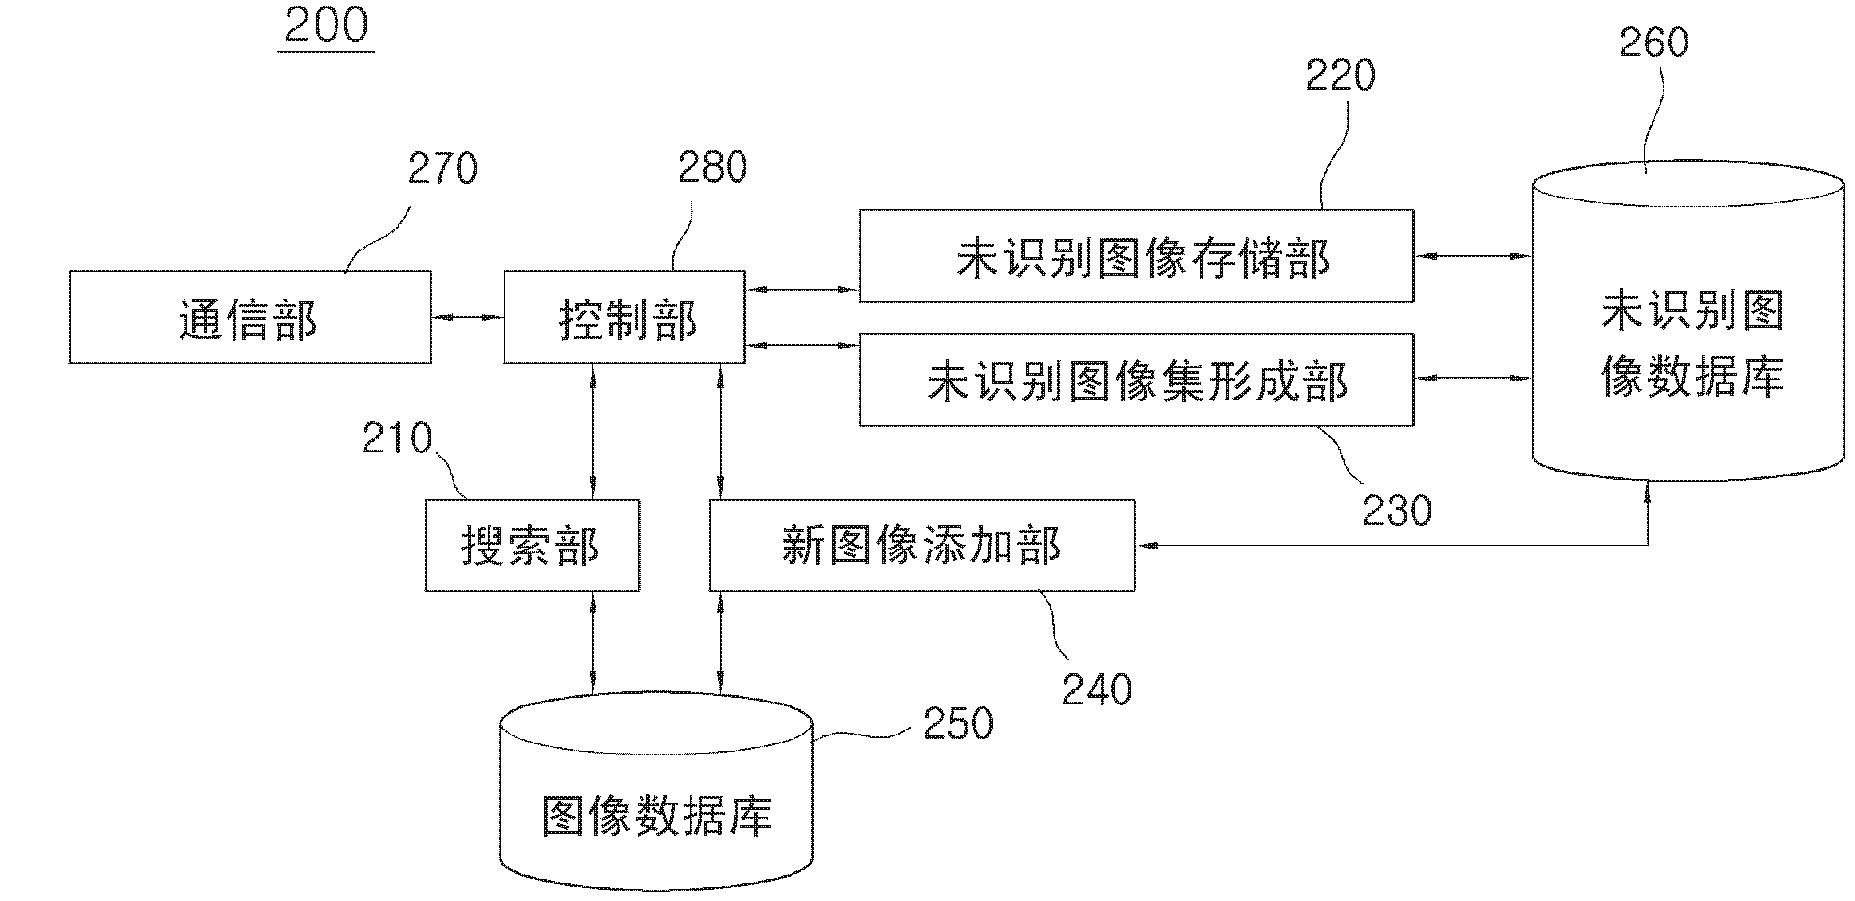 Method, system and computer-readable recording medium for adding new image and information on new image to image database